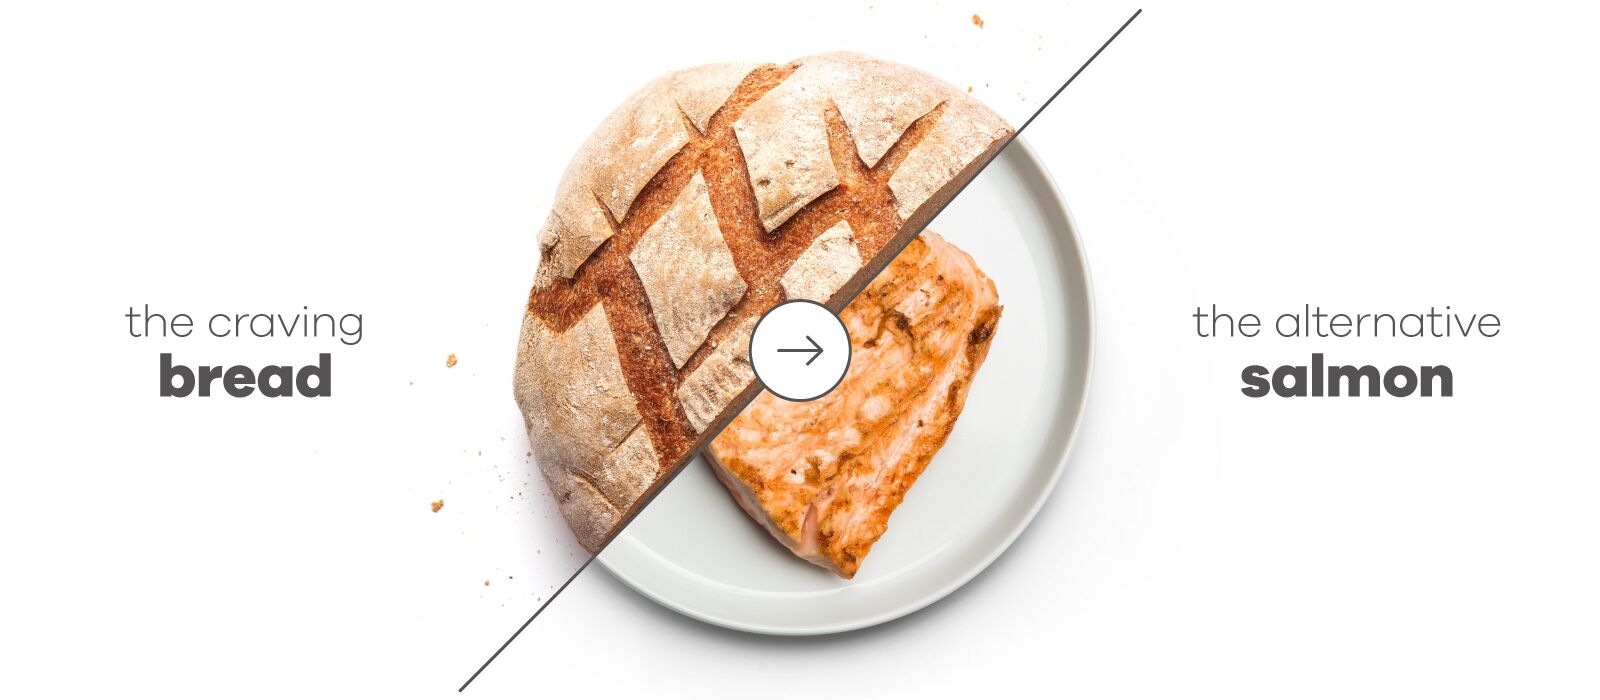 image of a loaf of bread with an arrow to a plate of salmon